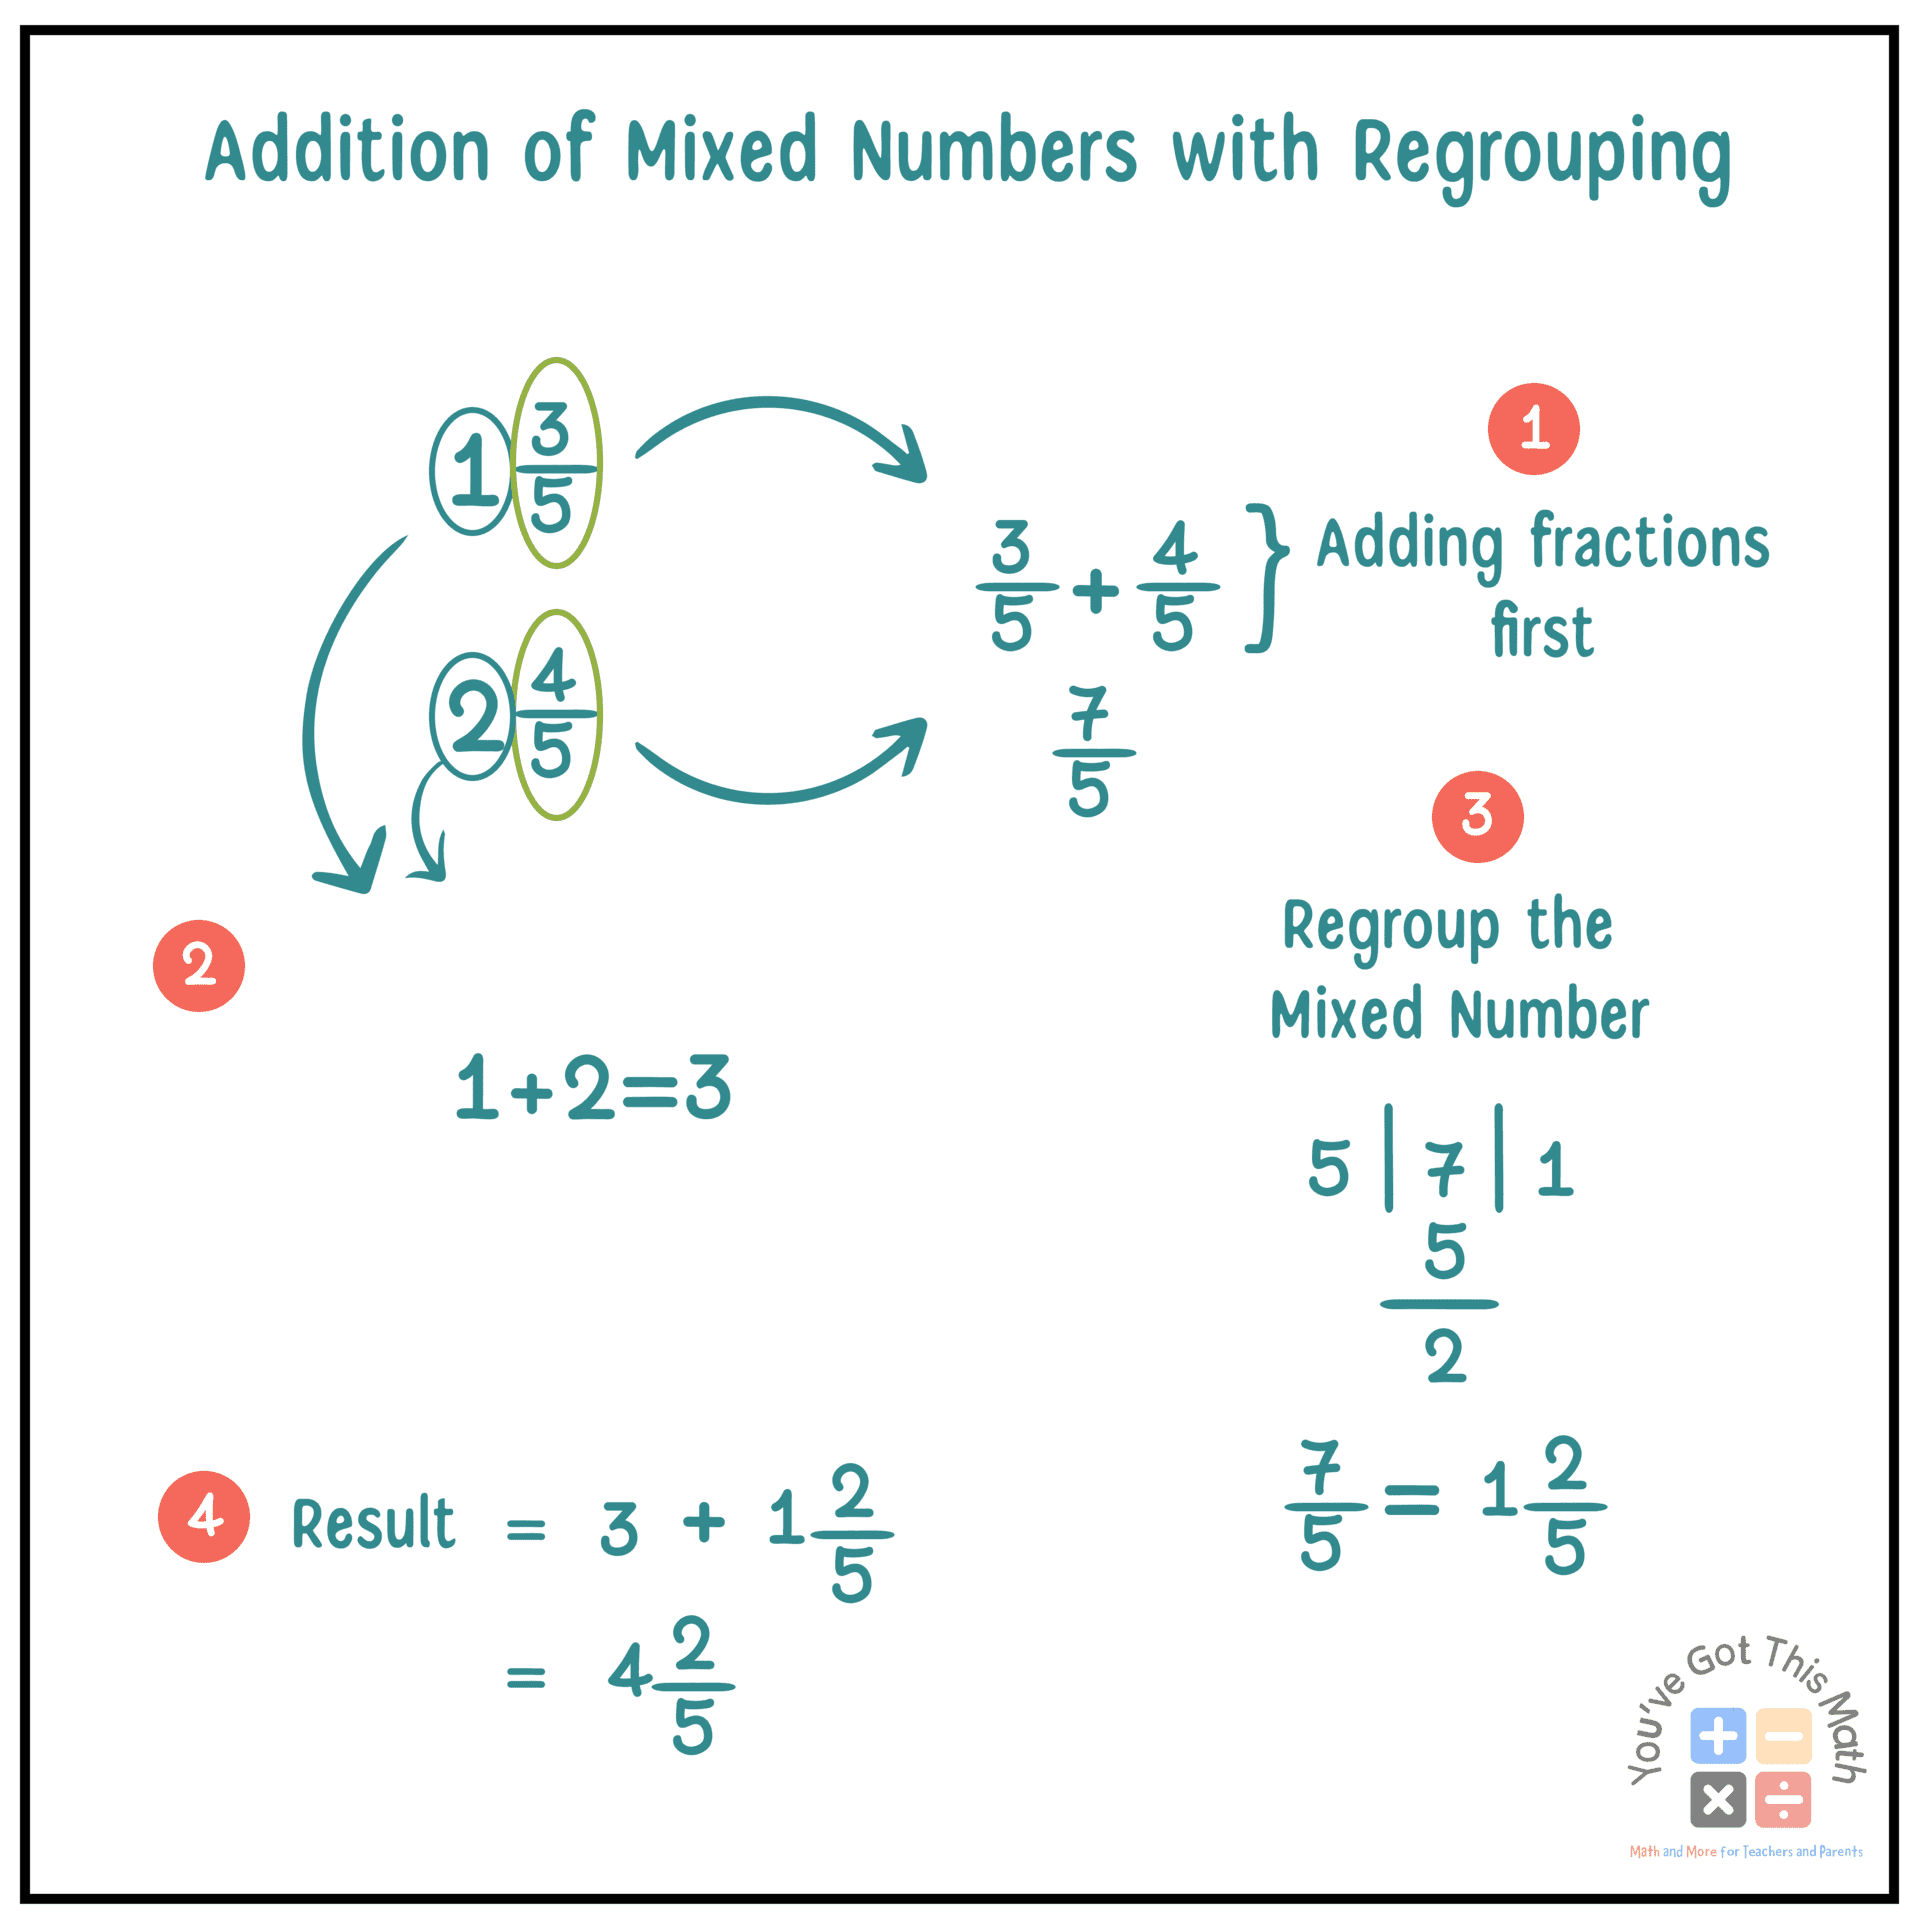 step by step procedure of adding mixed numbers with regrouping